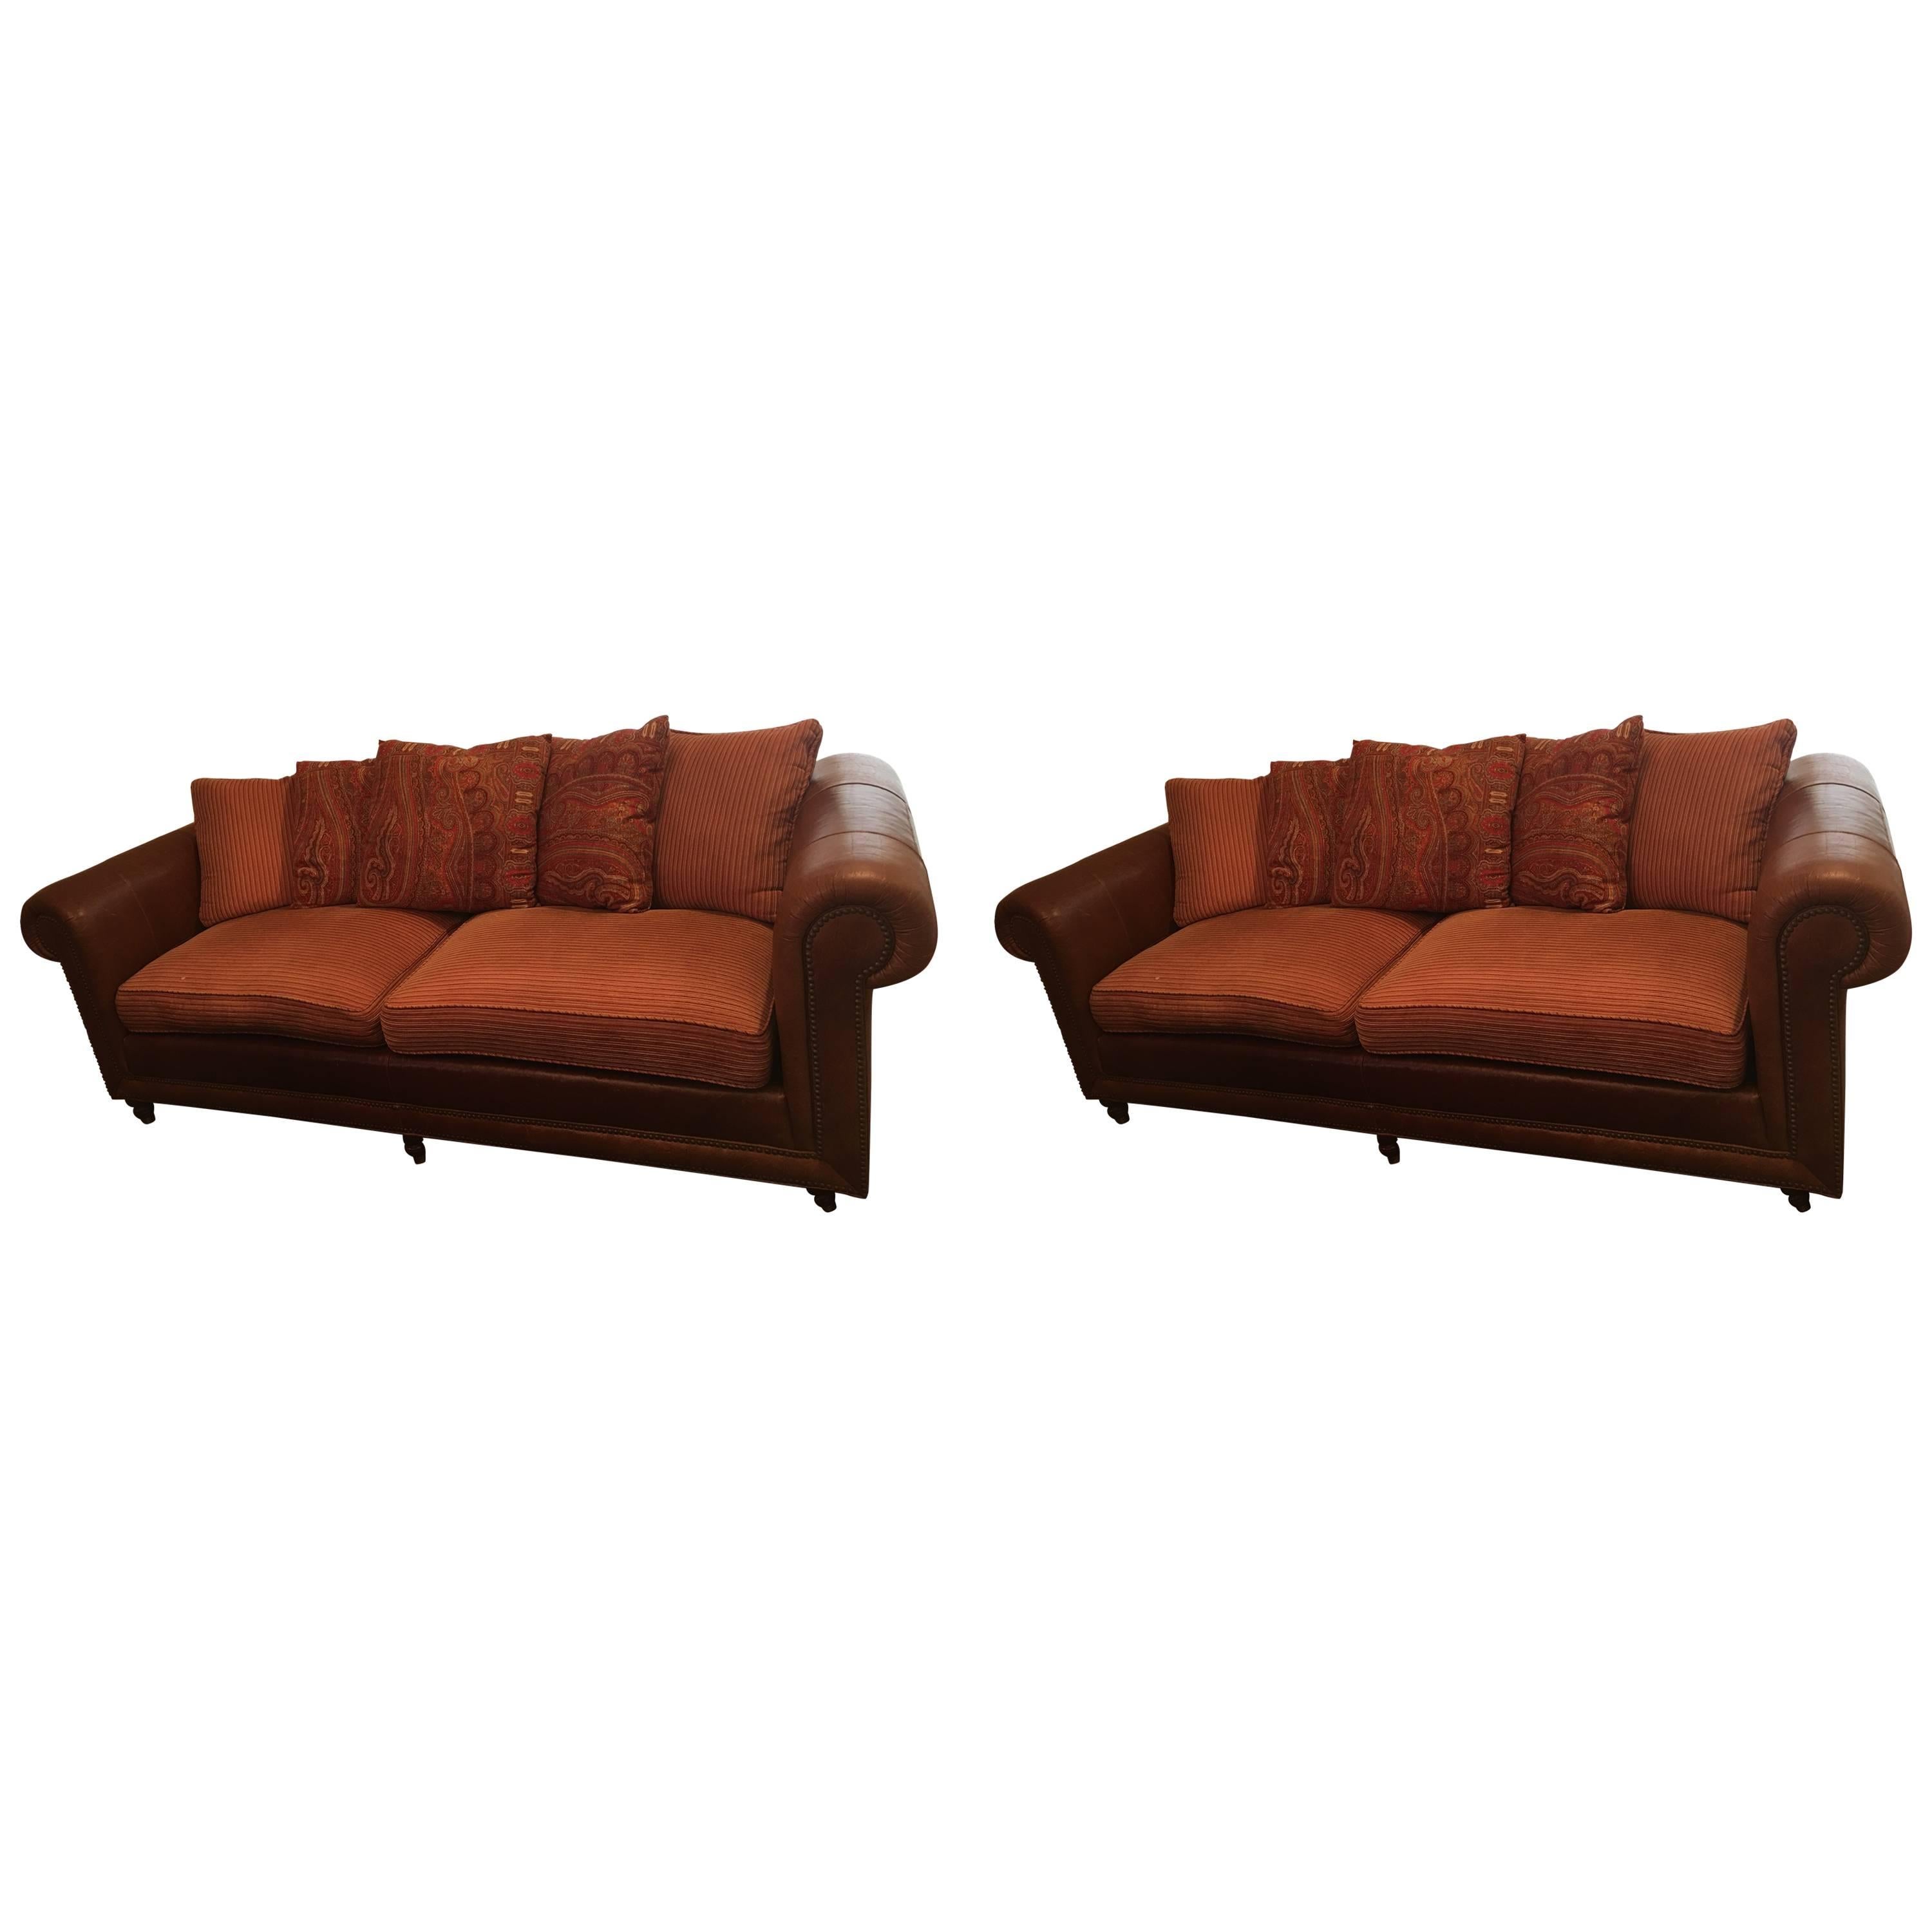 Handsome Pair of Well Loved Ralph Lauren Comfy Sofas